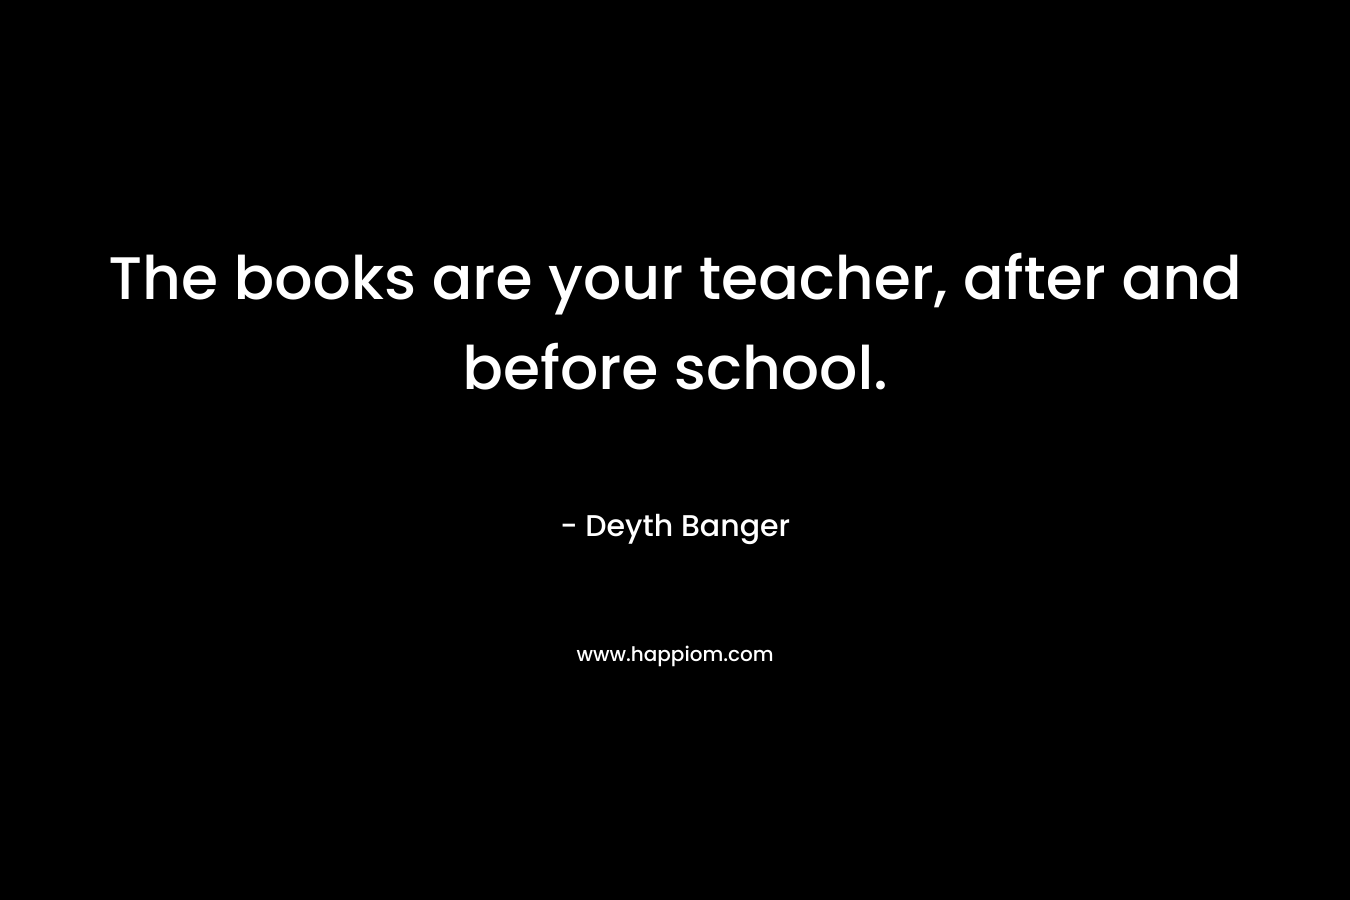 The books are your teacher, after and before school.